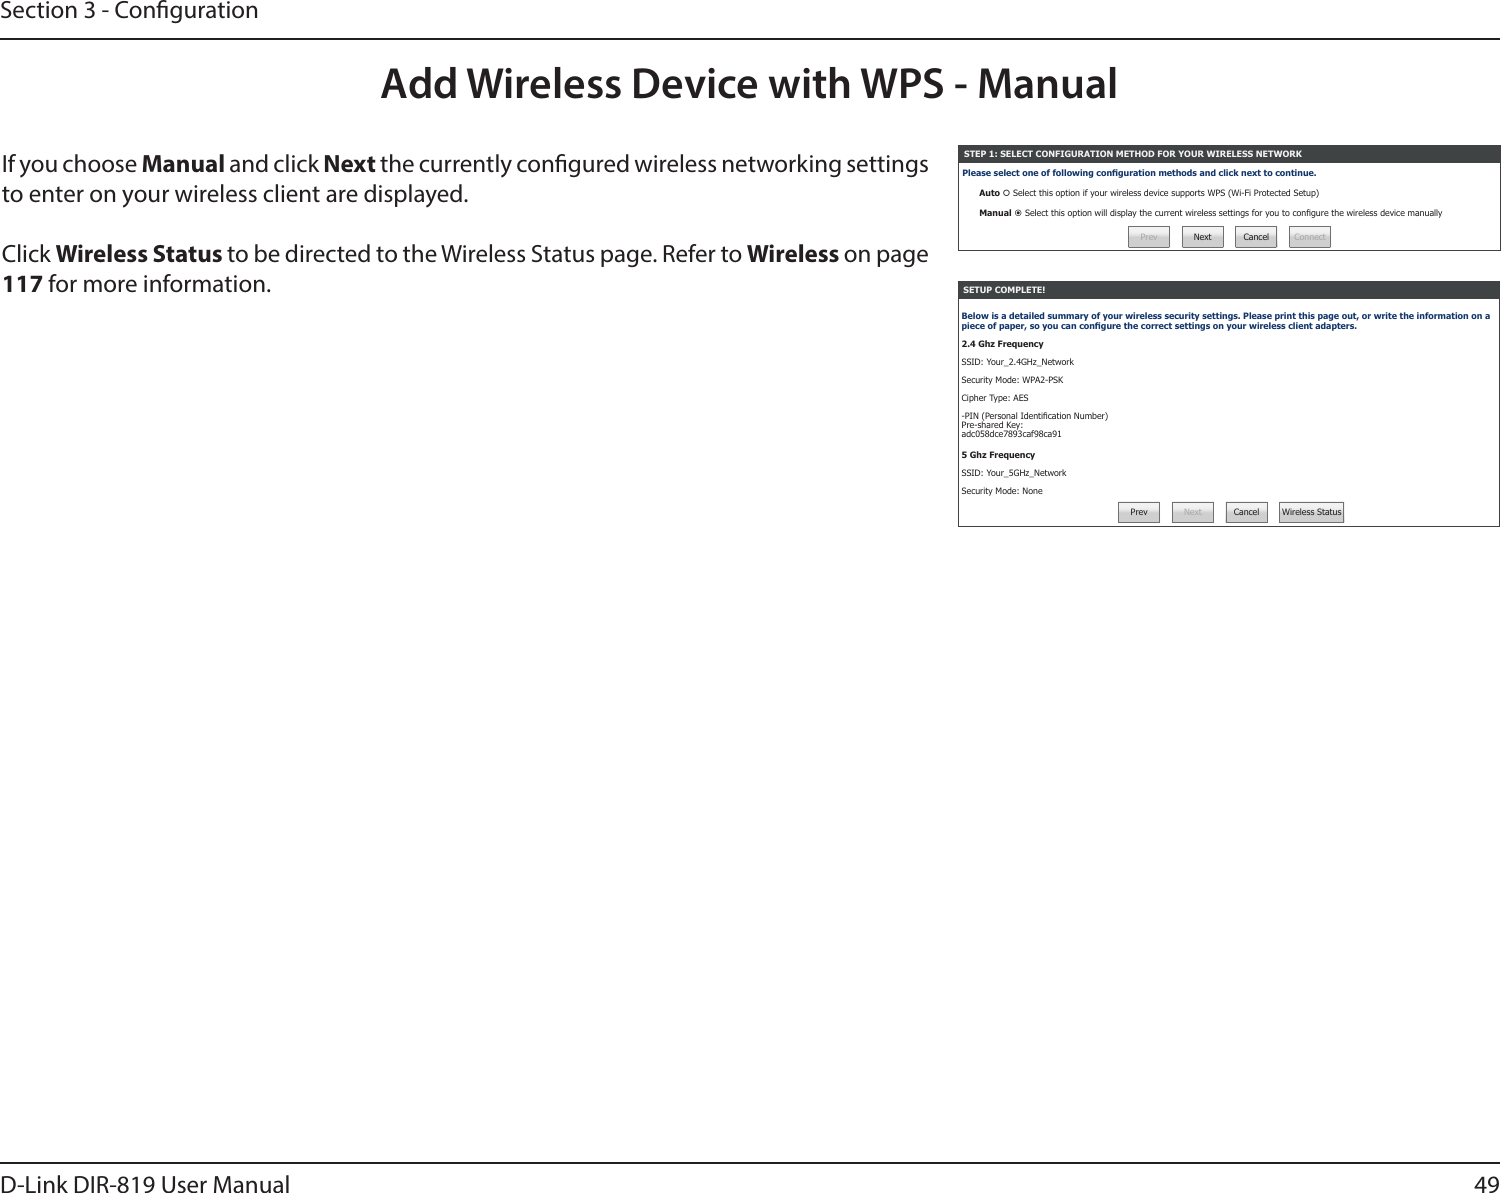 49D-Link DIR-819 User ManualSection 3 - CongurationIf you choose Manual and click Next the currently congured wireless networking settings to enter on your wireless client are displayed. Click Wireless Status to be directed to the Wireless Status page. Refer to Wireless on page 117 for more information.Add Wireless Device with WPS - ManualSETUP COMPLETE!Below is a detailed summary of your wireless security settings. Please print this page out, or write the information on a piece of paper, so you can congure the correct settings on your wireless client adapters.2.4 Ghz FrequencySSID: Your_2.4GHz_NetworkSecurity Mode: WPA2-PSKCipher Type: AES-PIN (Personal Identication Number) Pre-shared Key: adc058dce7893caf98ca915 Ghz FrequencySSID: Your_5GHz_NetworkSecurity Mode: None Prev Next Cancel Wireless StatusSTEP 1: SELECT CONFIGURATION METHOD FOR YOUR WIRELESS NETWORKPlease select one of following conguration methods and click next to continue.Auto  Select this option if your wireless device supports WPS (Wi-Fi Protected Setup)Manual  Select this option will display the current wireless settings for you to congure the wireless device manuallyPrev Next Cancel Connect